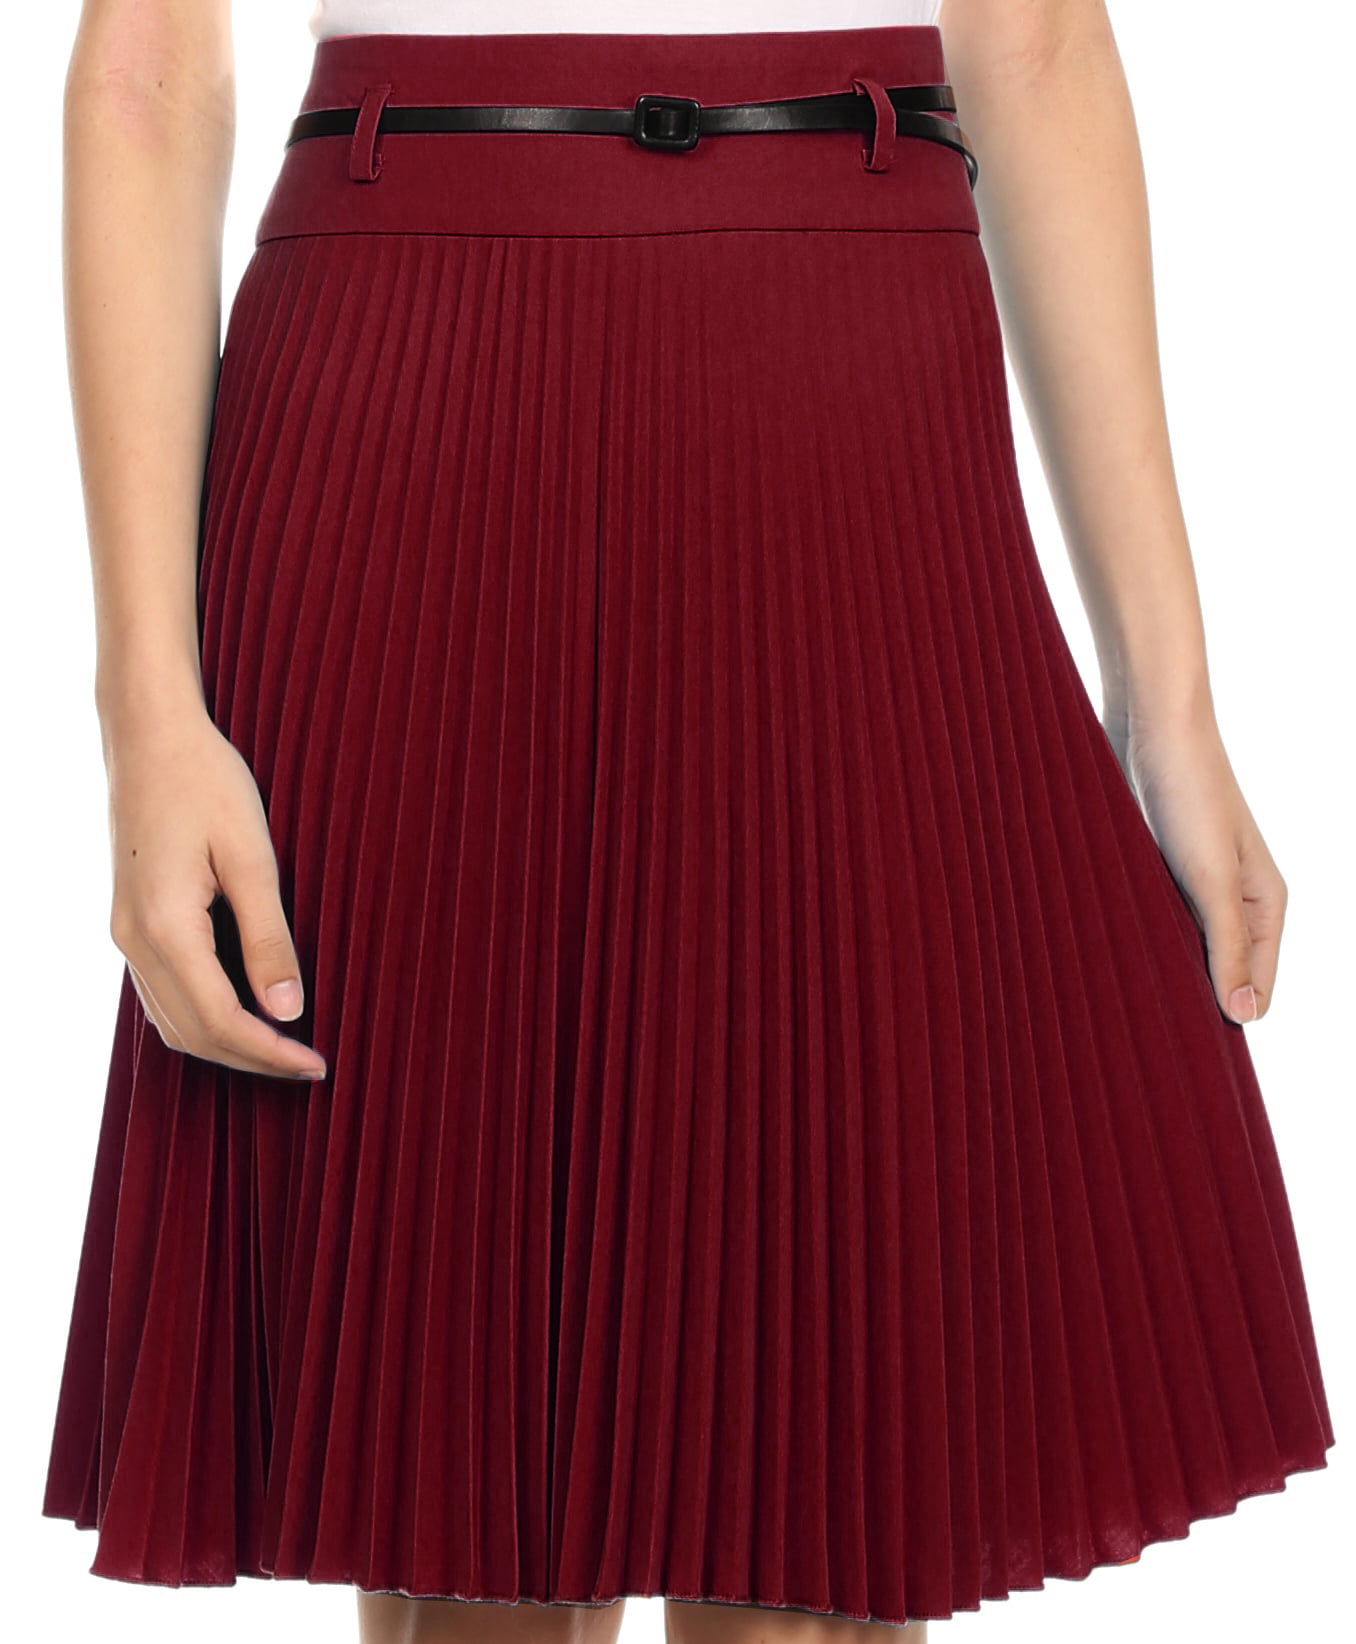 Sakkas Knee Length Pleated A-Line Skirt with Skinny Belt - Red - Small ...